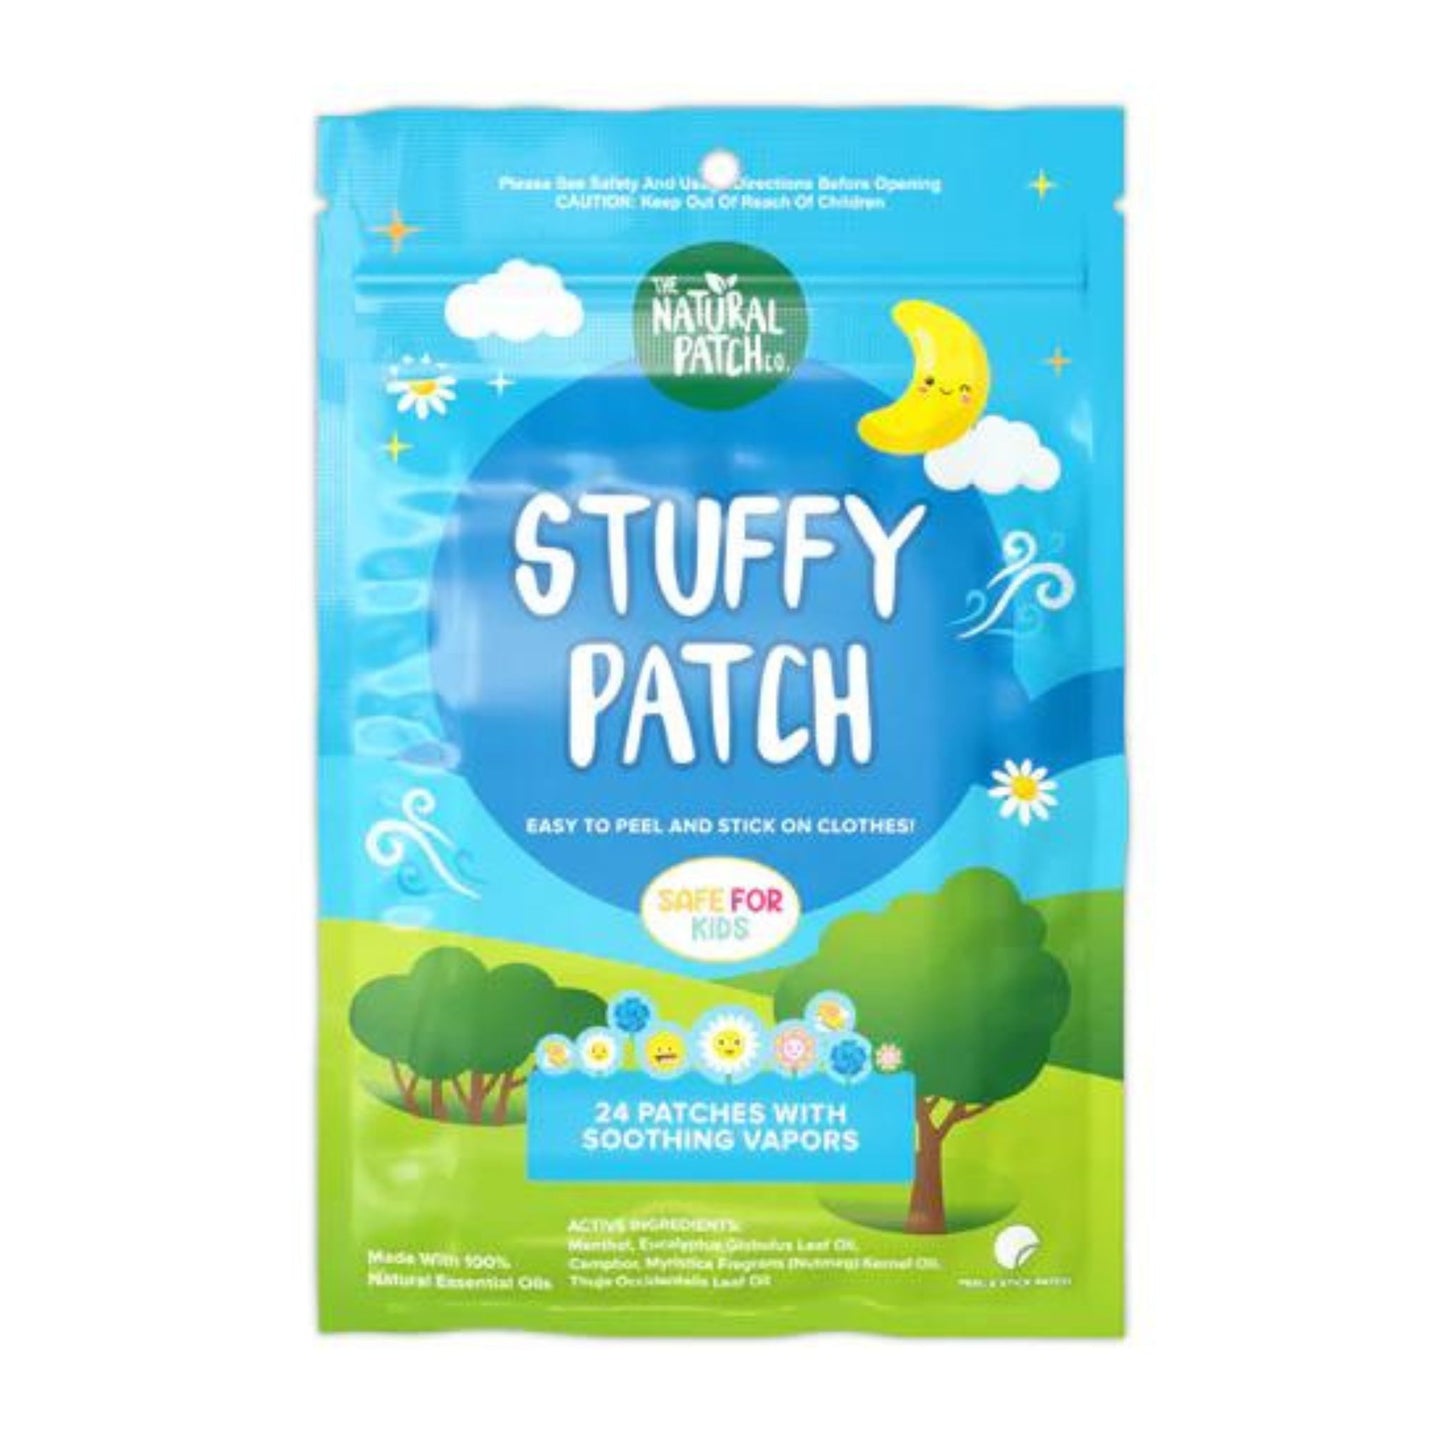 StuffyPatch - Congestion Relief Patches